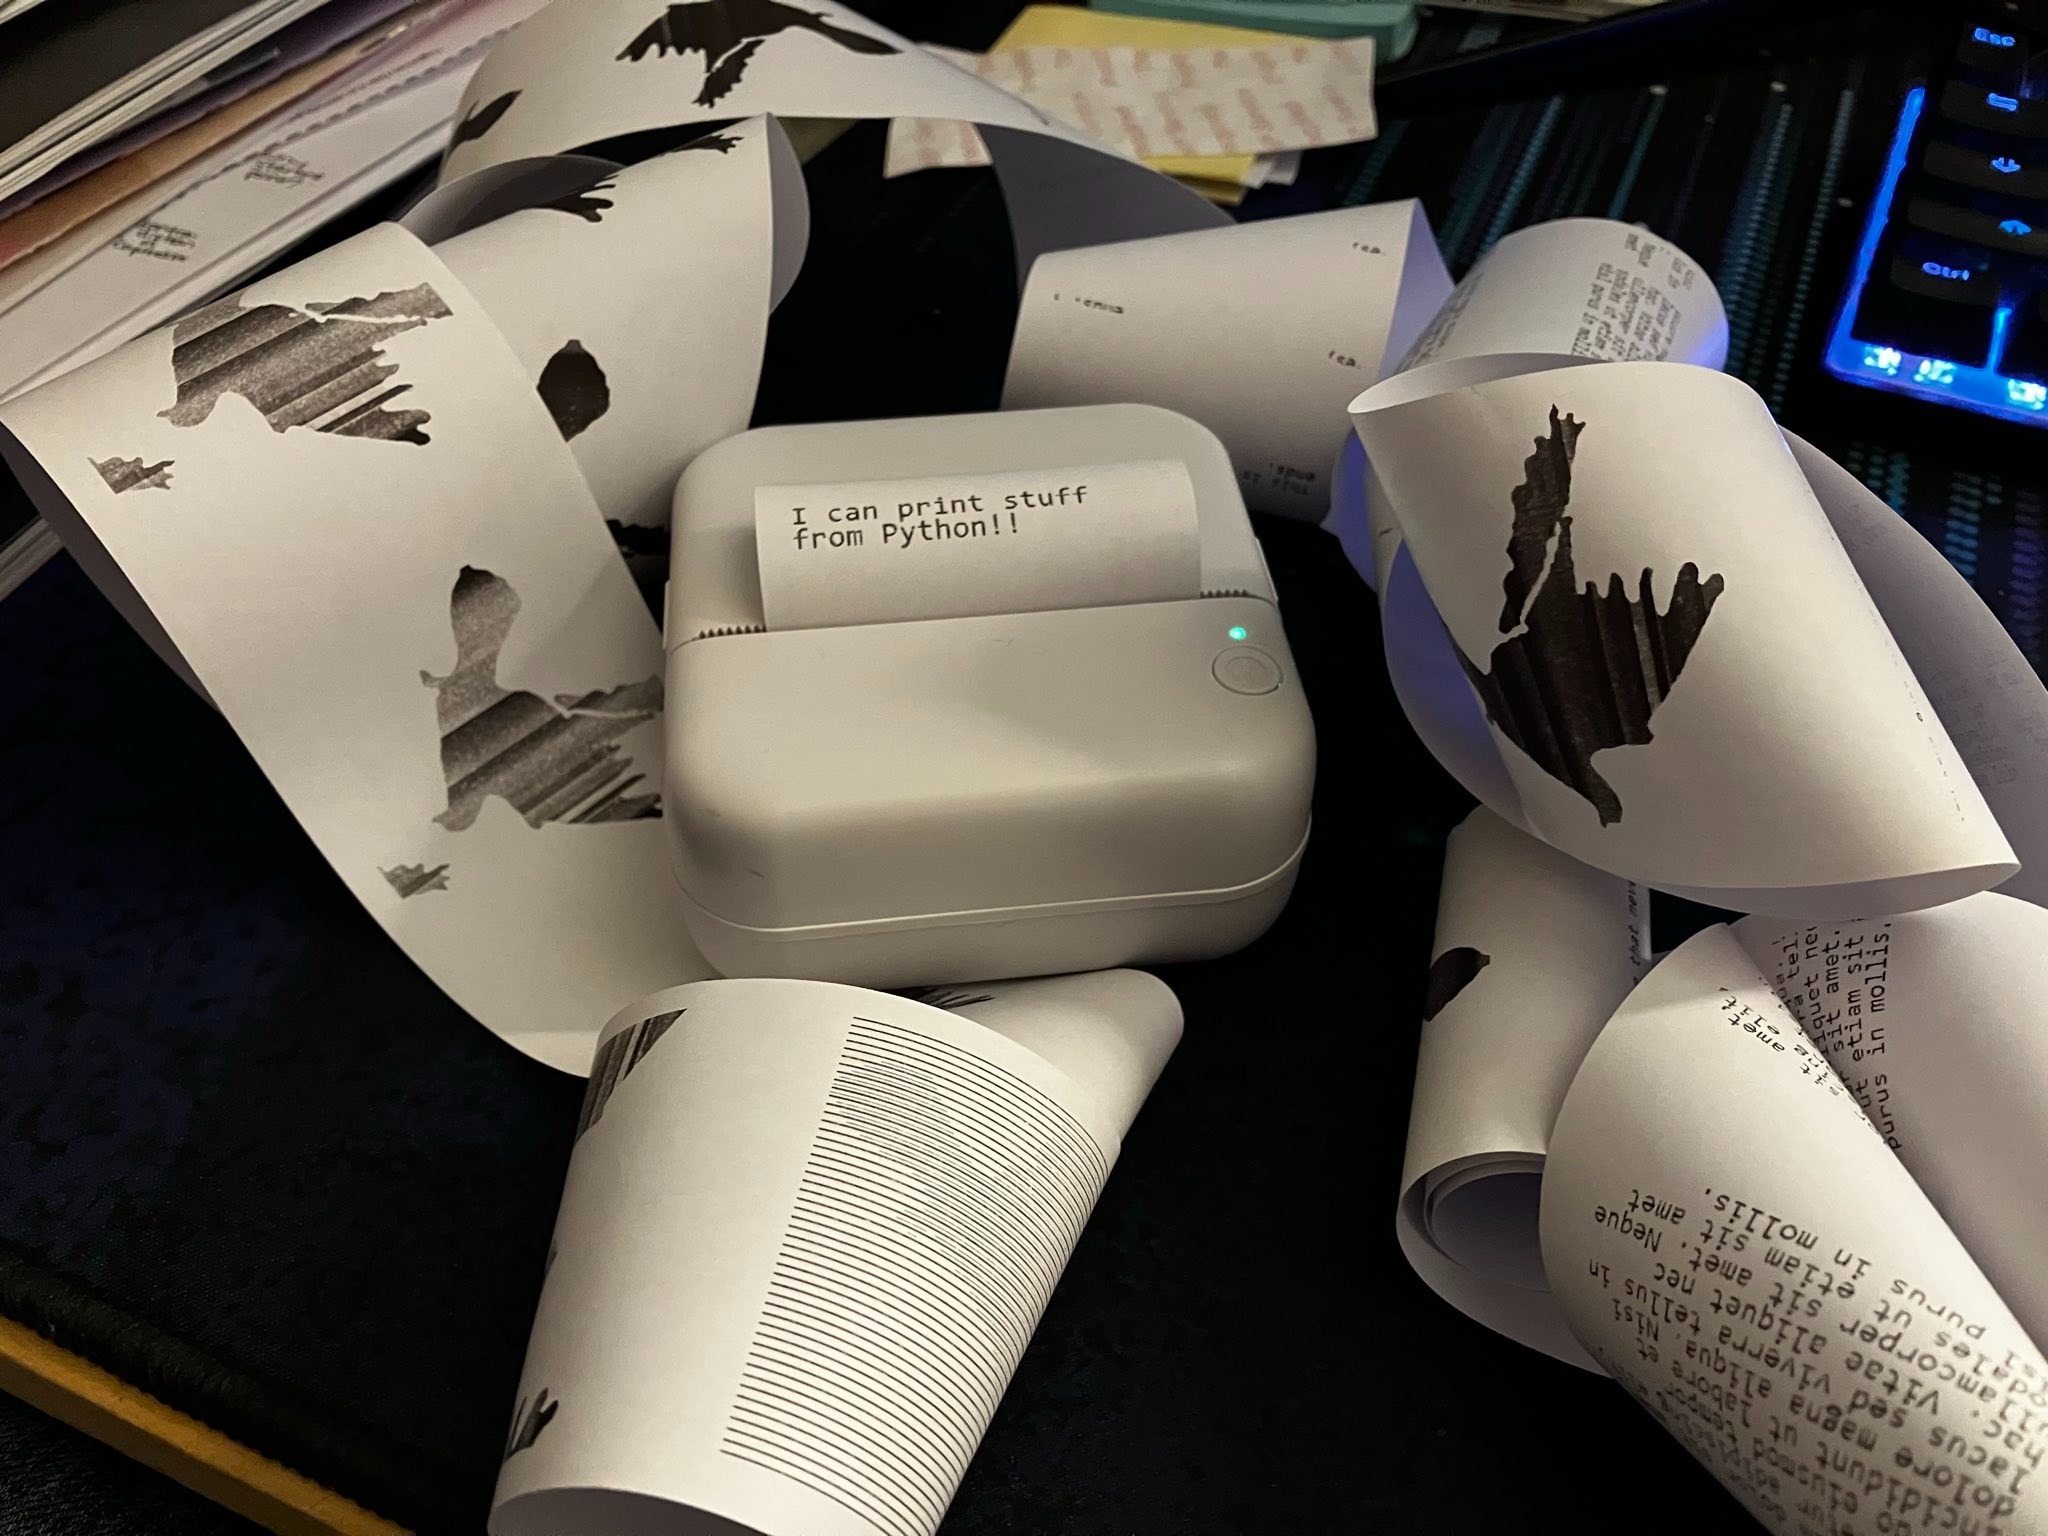 A mini Bluetooth thermal printer that has just printed an "I can print stuff from Python!!" message. A spool of failed prints are surrounding the printer.